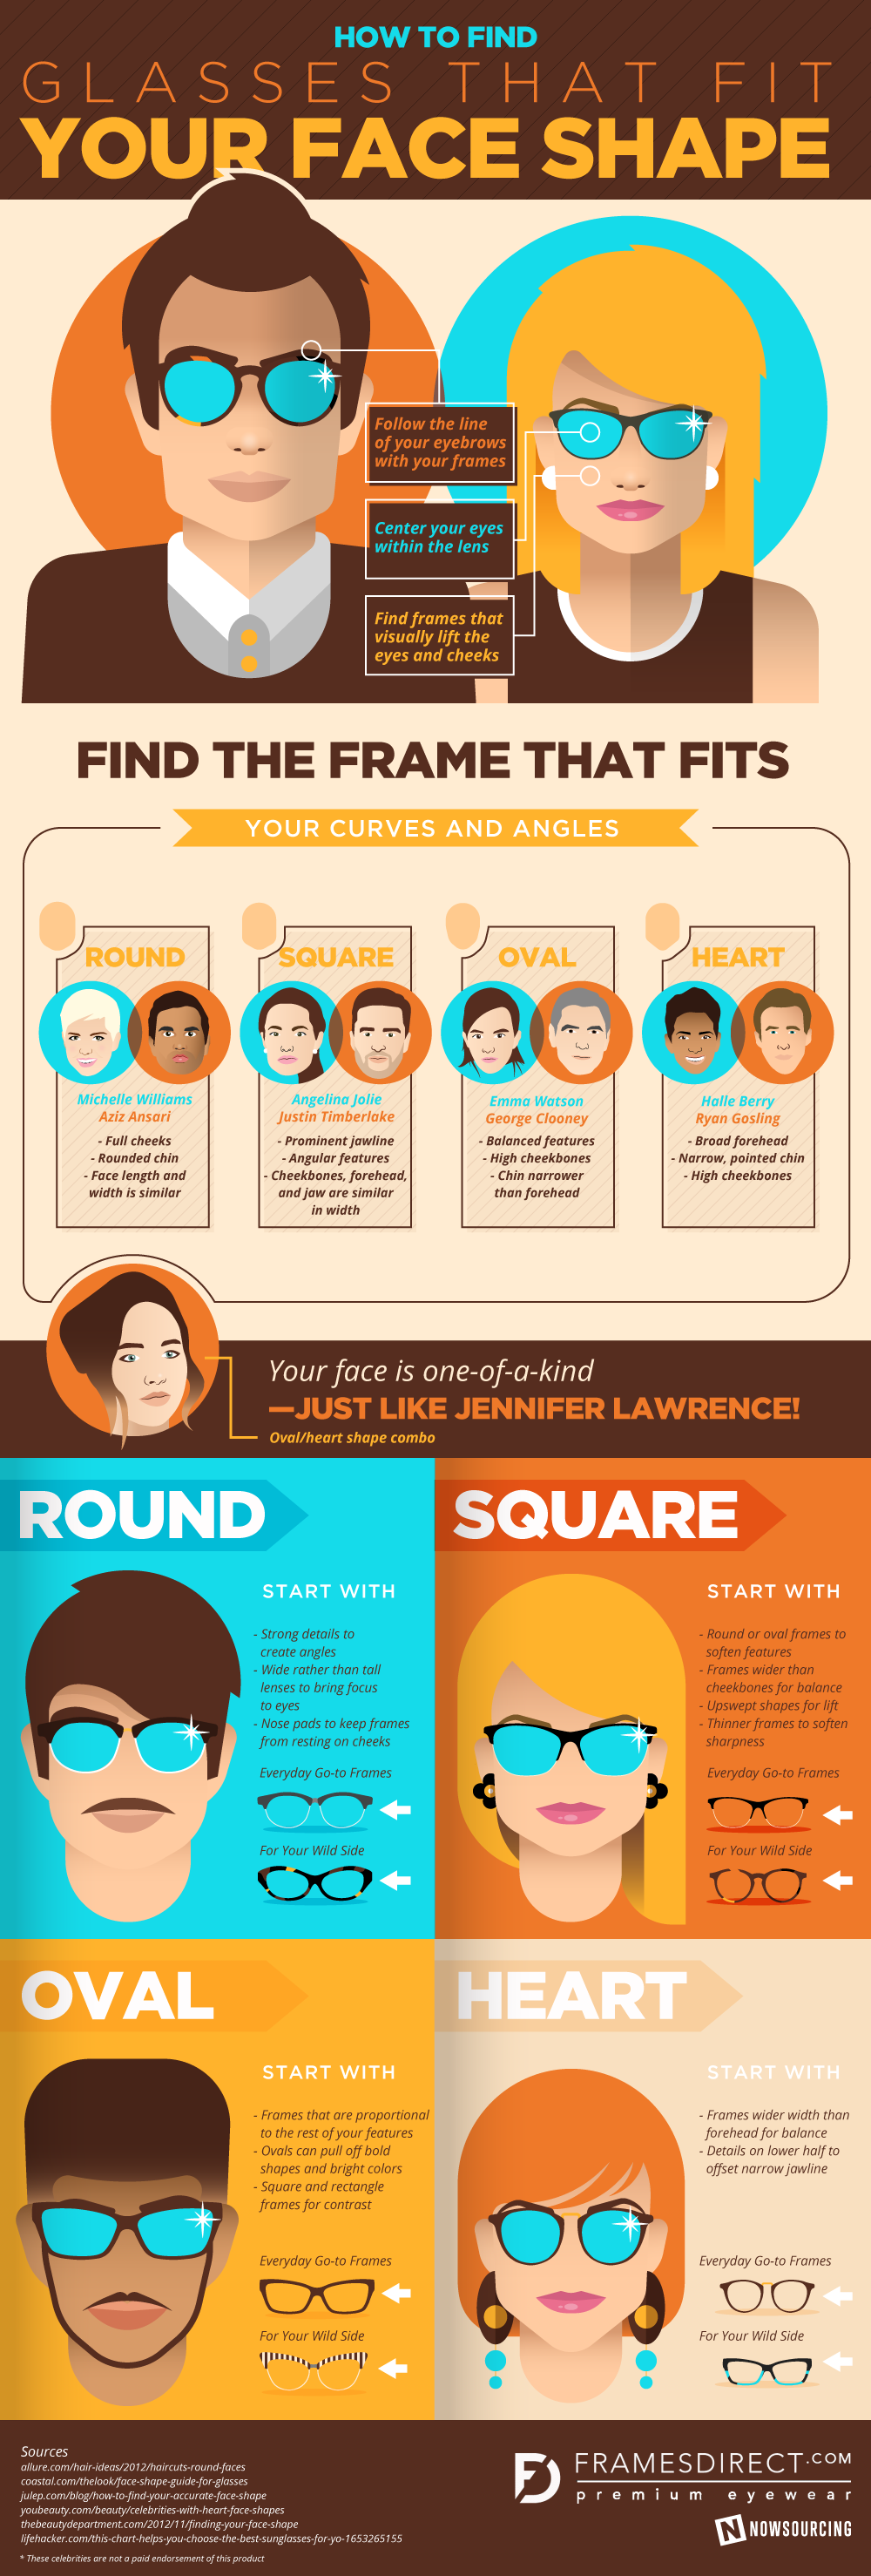 How To Find Glasses That Fit Your Face Shape [infographic]